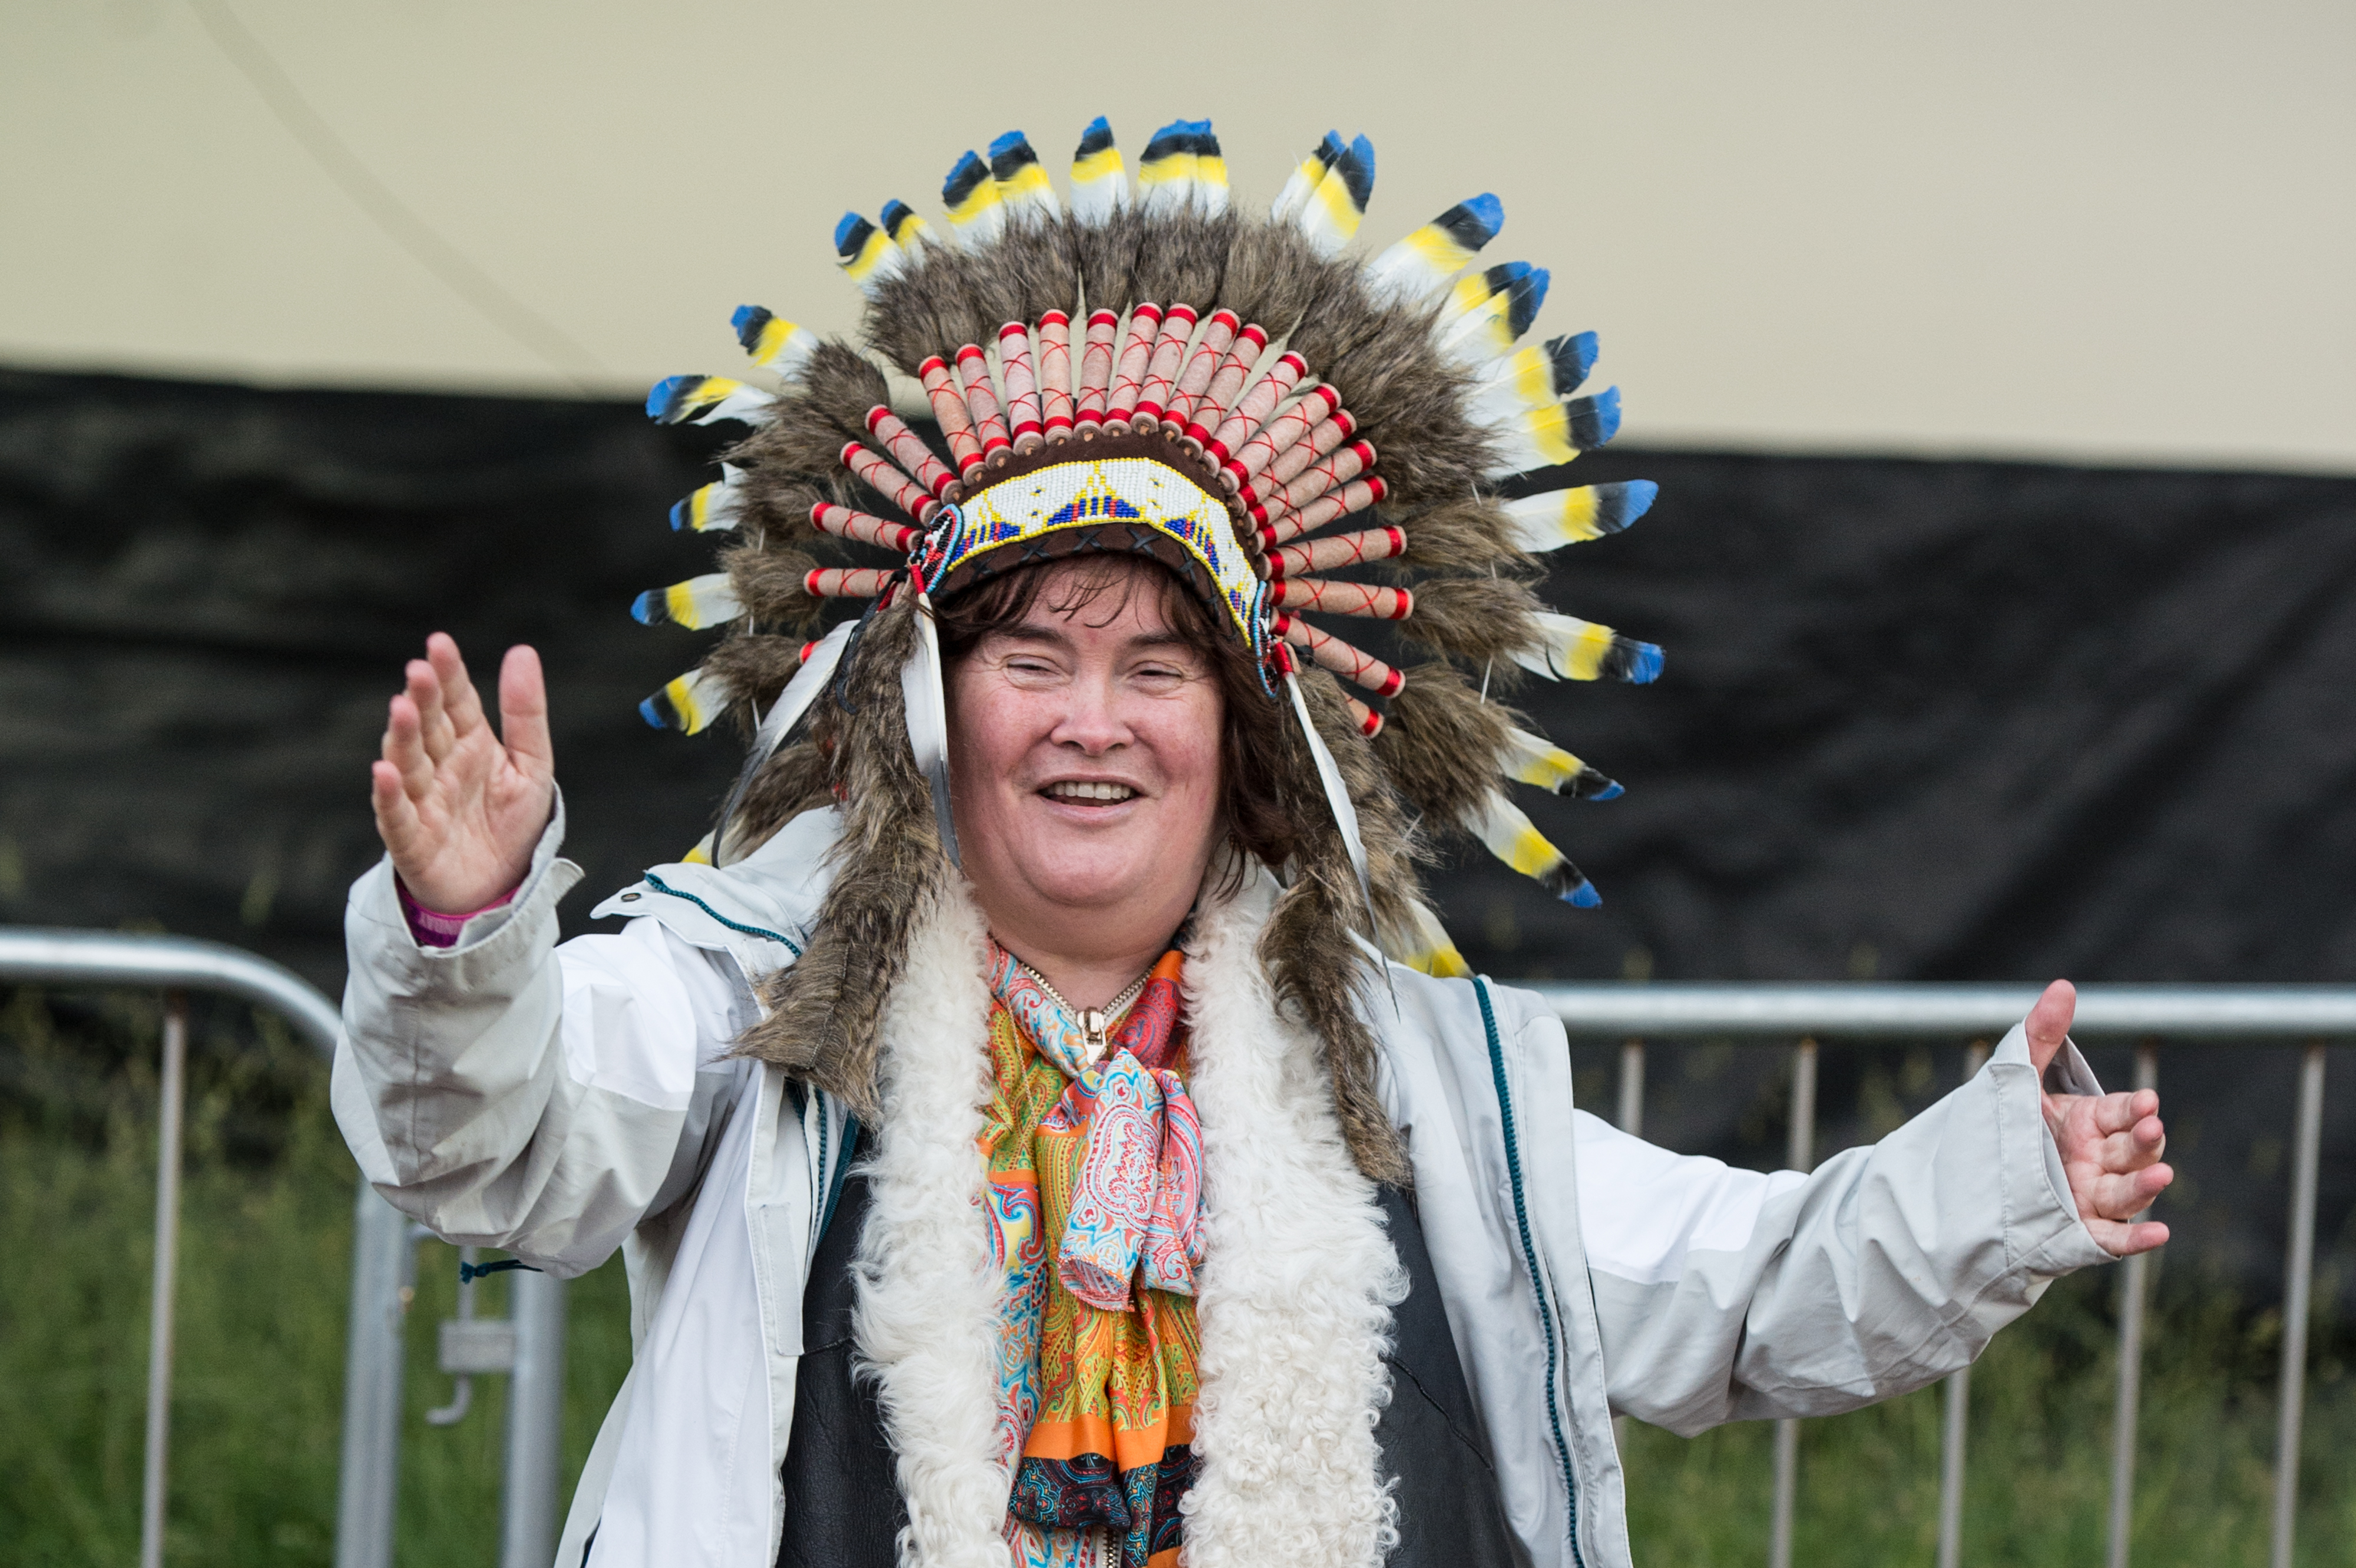 Susan Boyle attends "T In The Park - Day 3" on July 12, 2015 in Perth, Scotland | Source: Getty Images